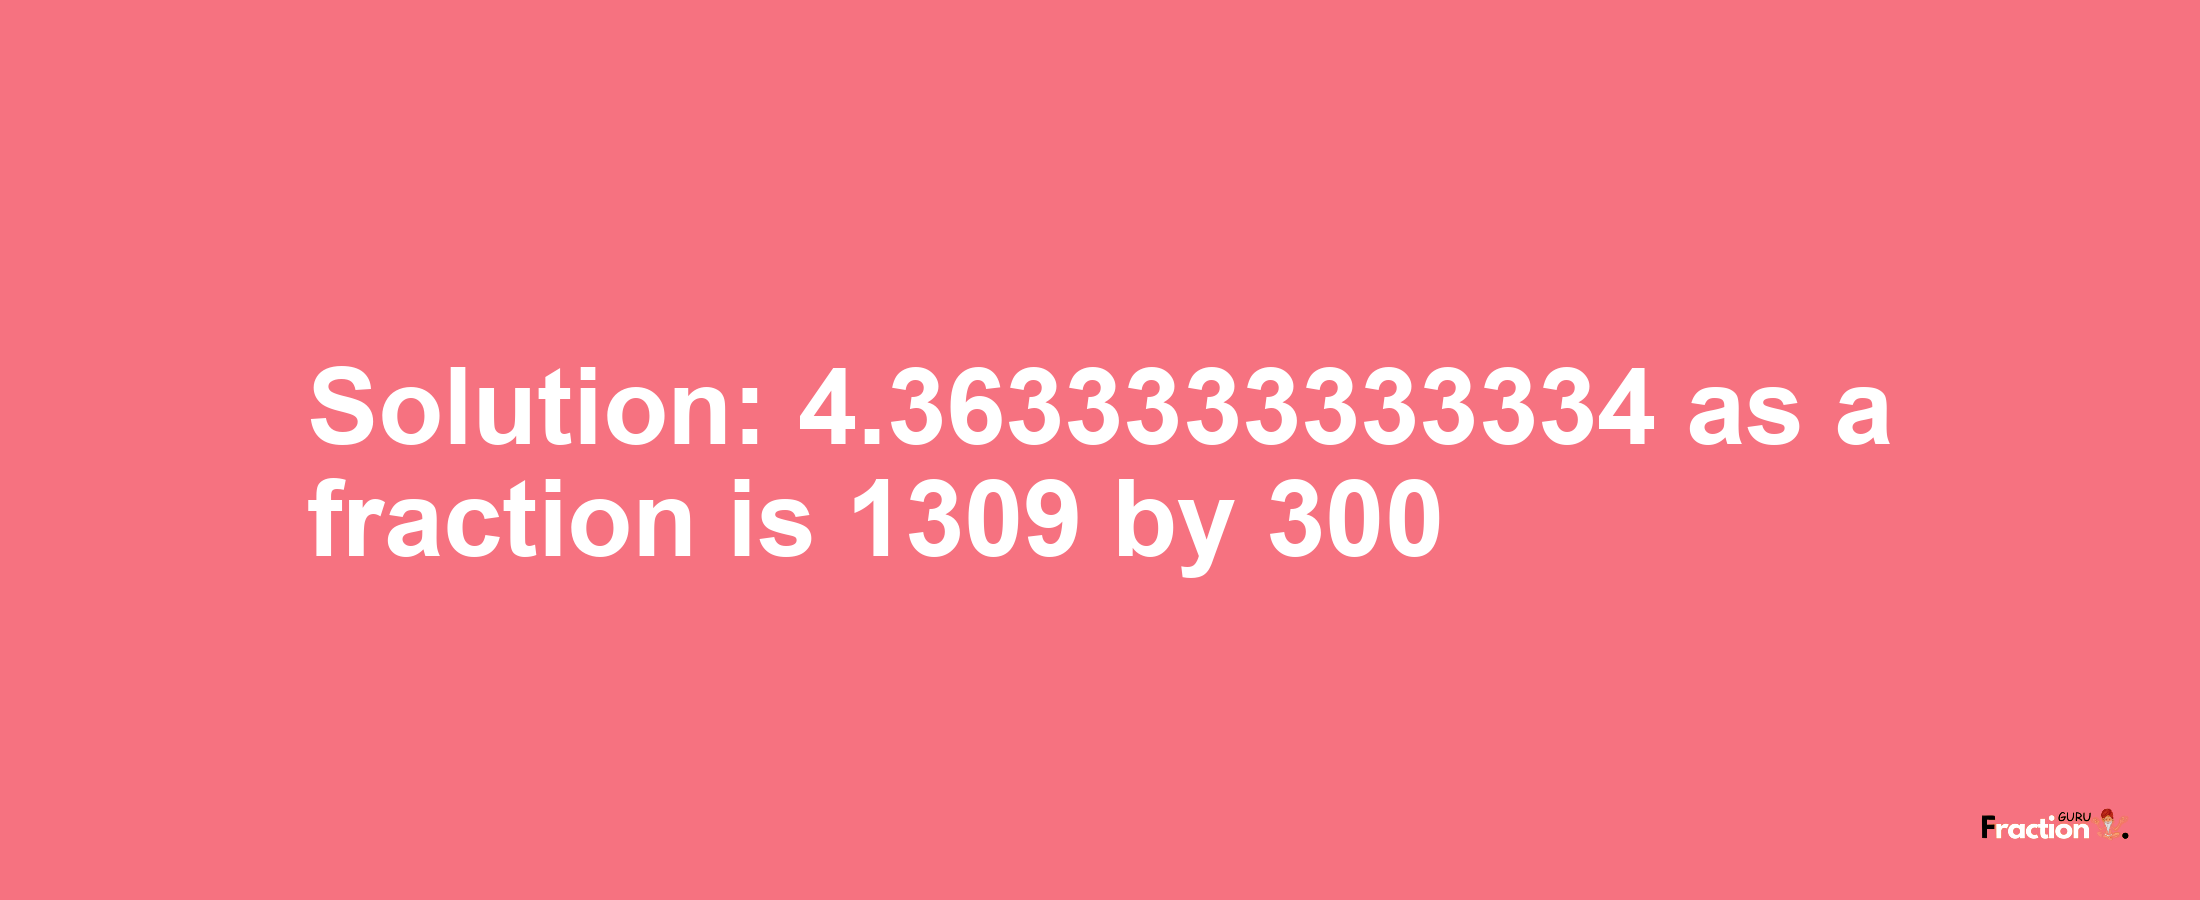 Solution:4.3633333333334 as a fraction is 1309/300